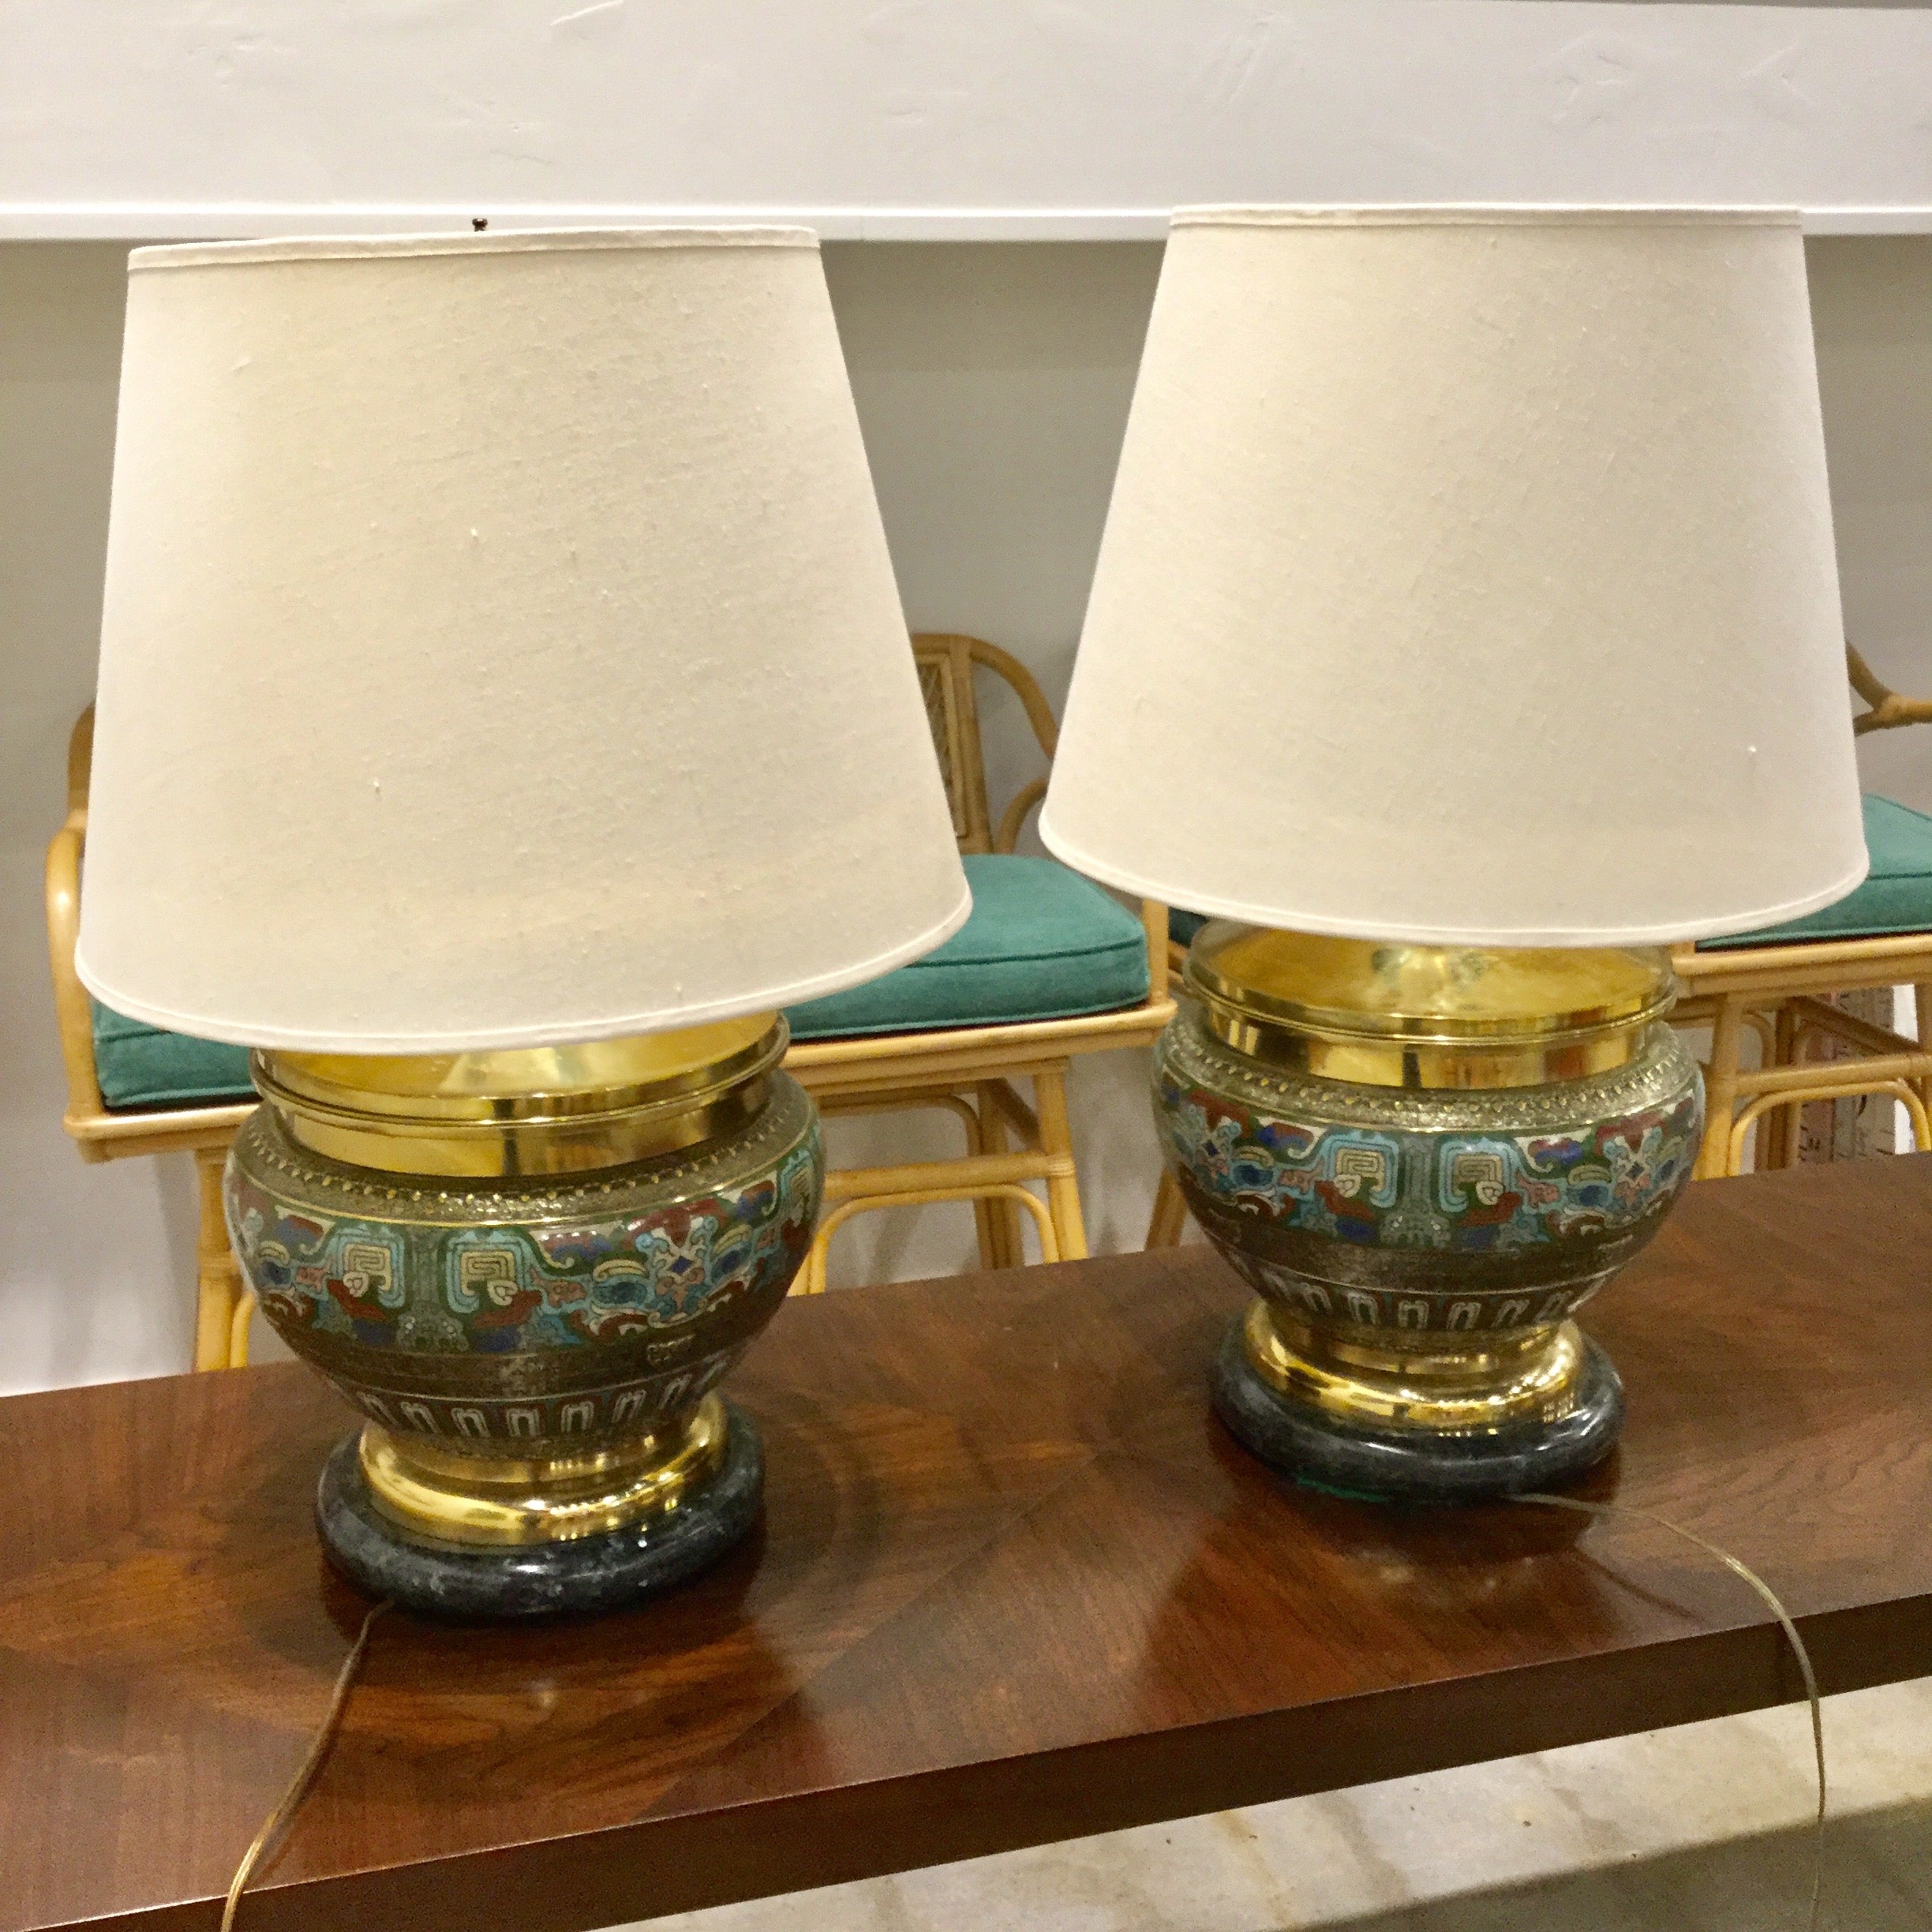 Vintage Brass and Enamel Lamps (Pair) - Park + Eighth